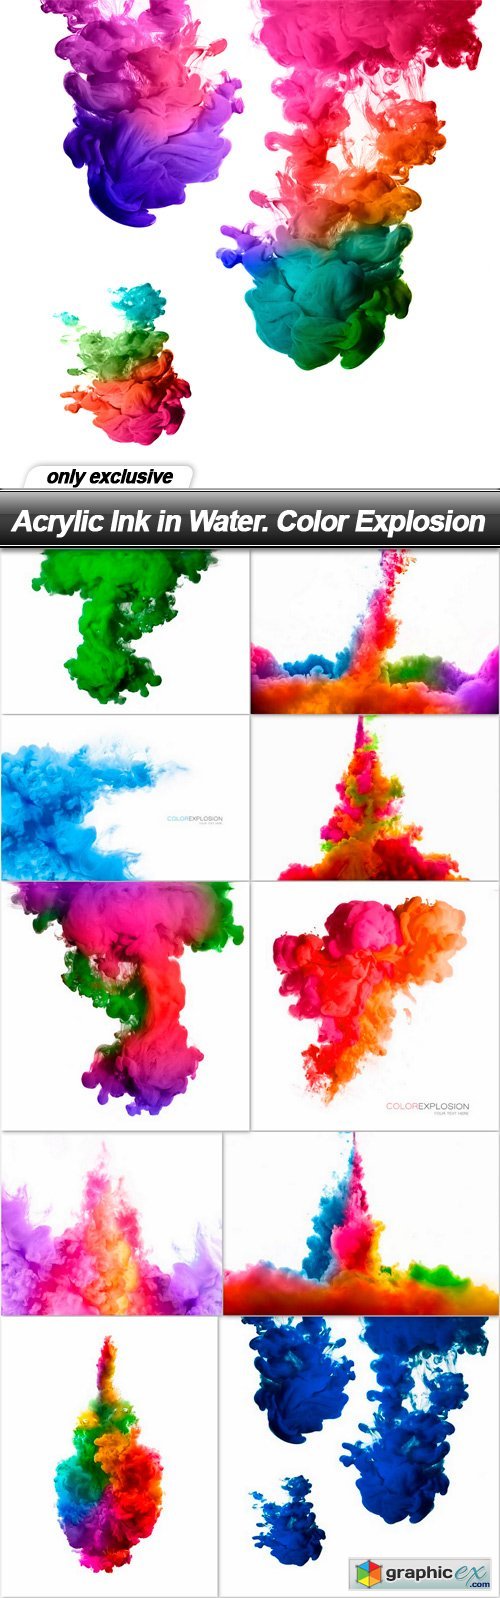 Acrylic Ink in Water. Color Explosion - 11 UHQ JPEG